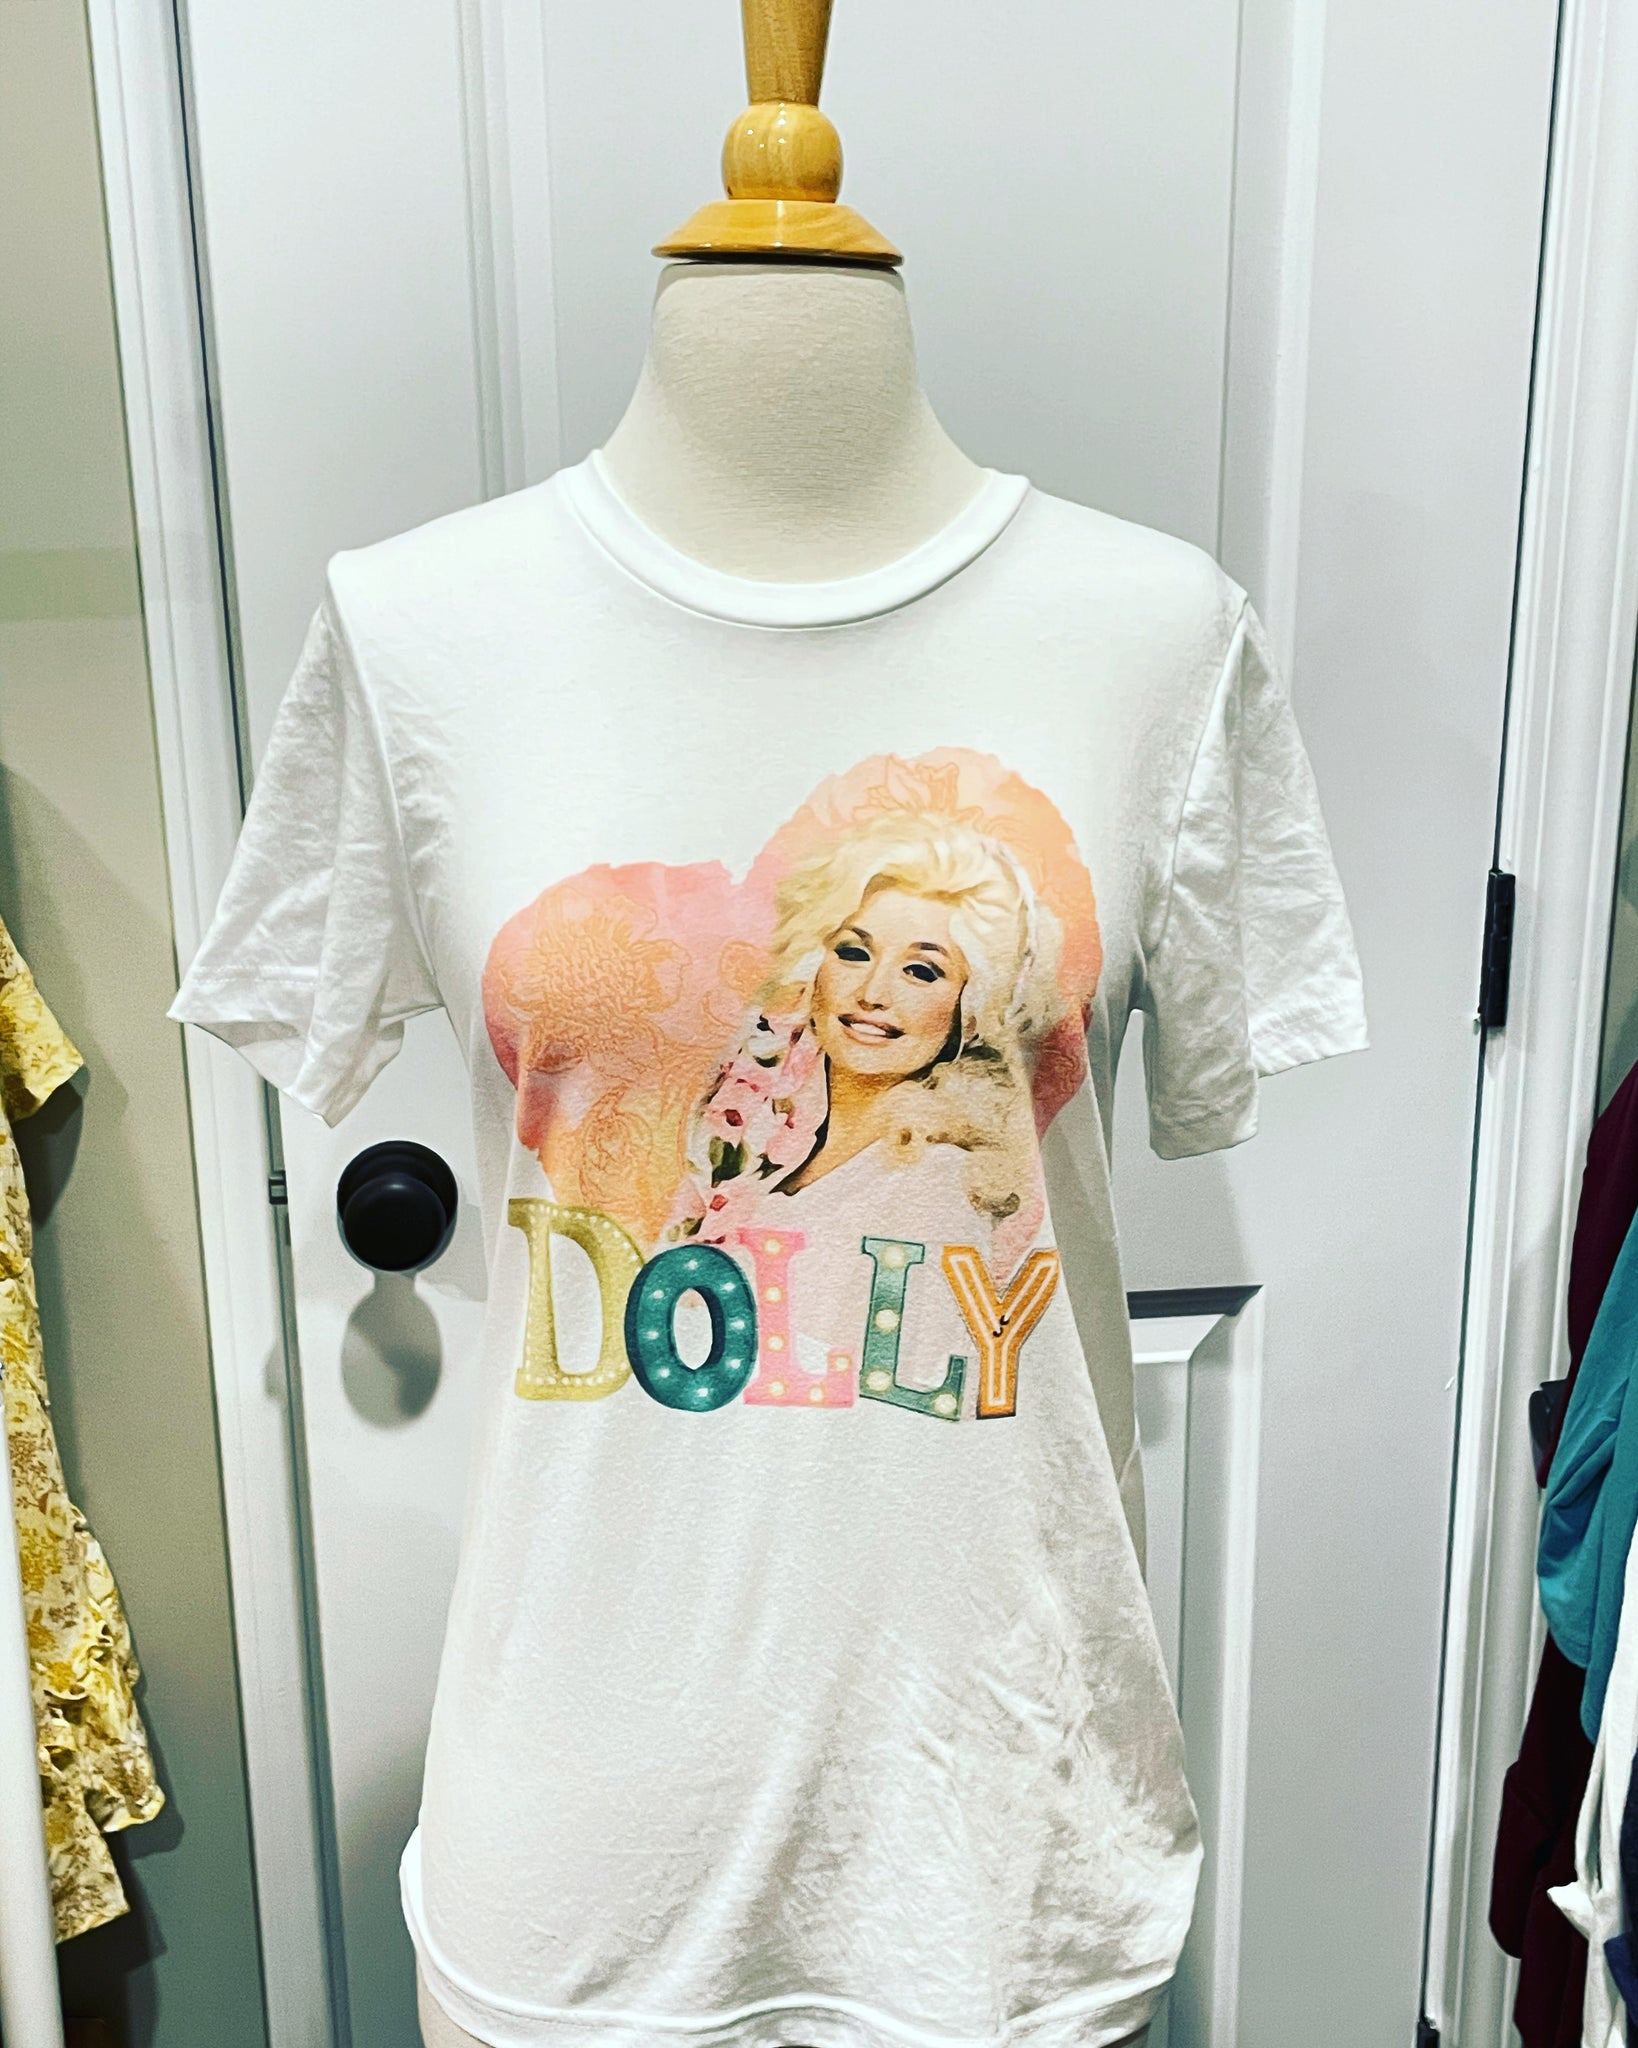 Dolly Graphic T-Shirt